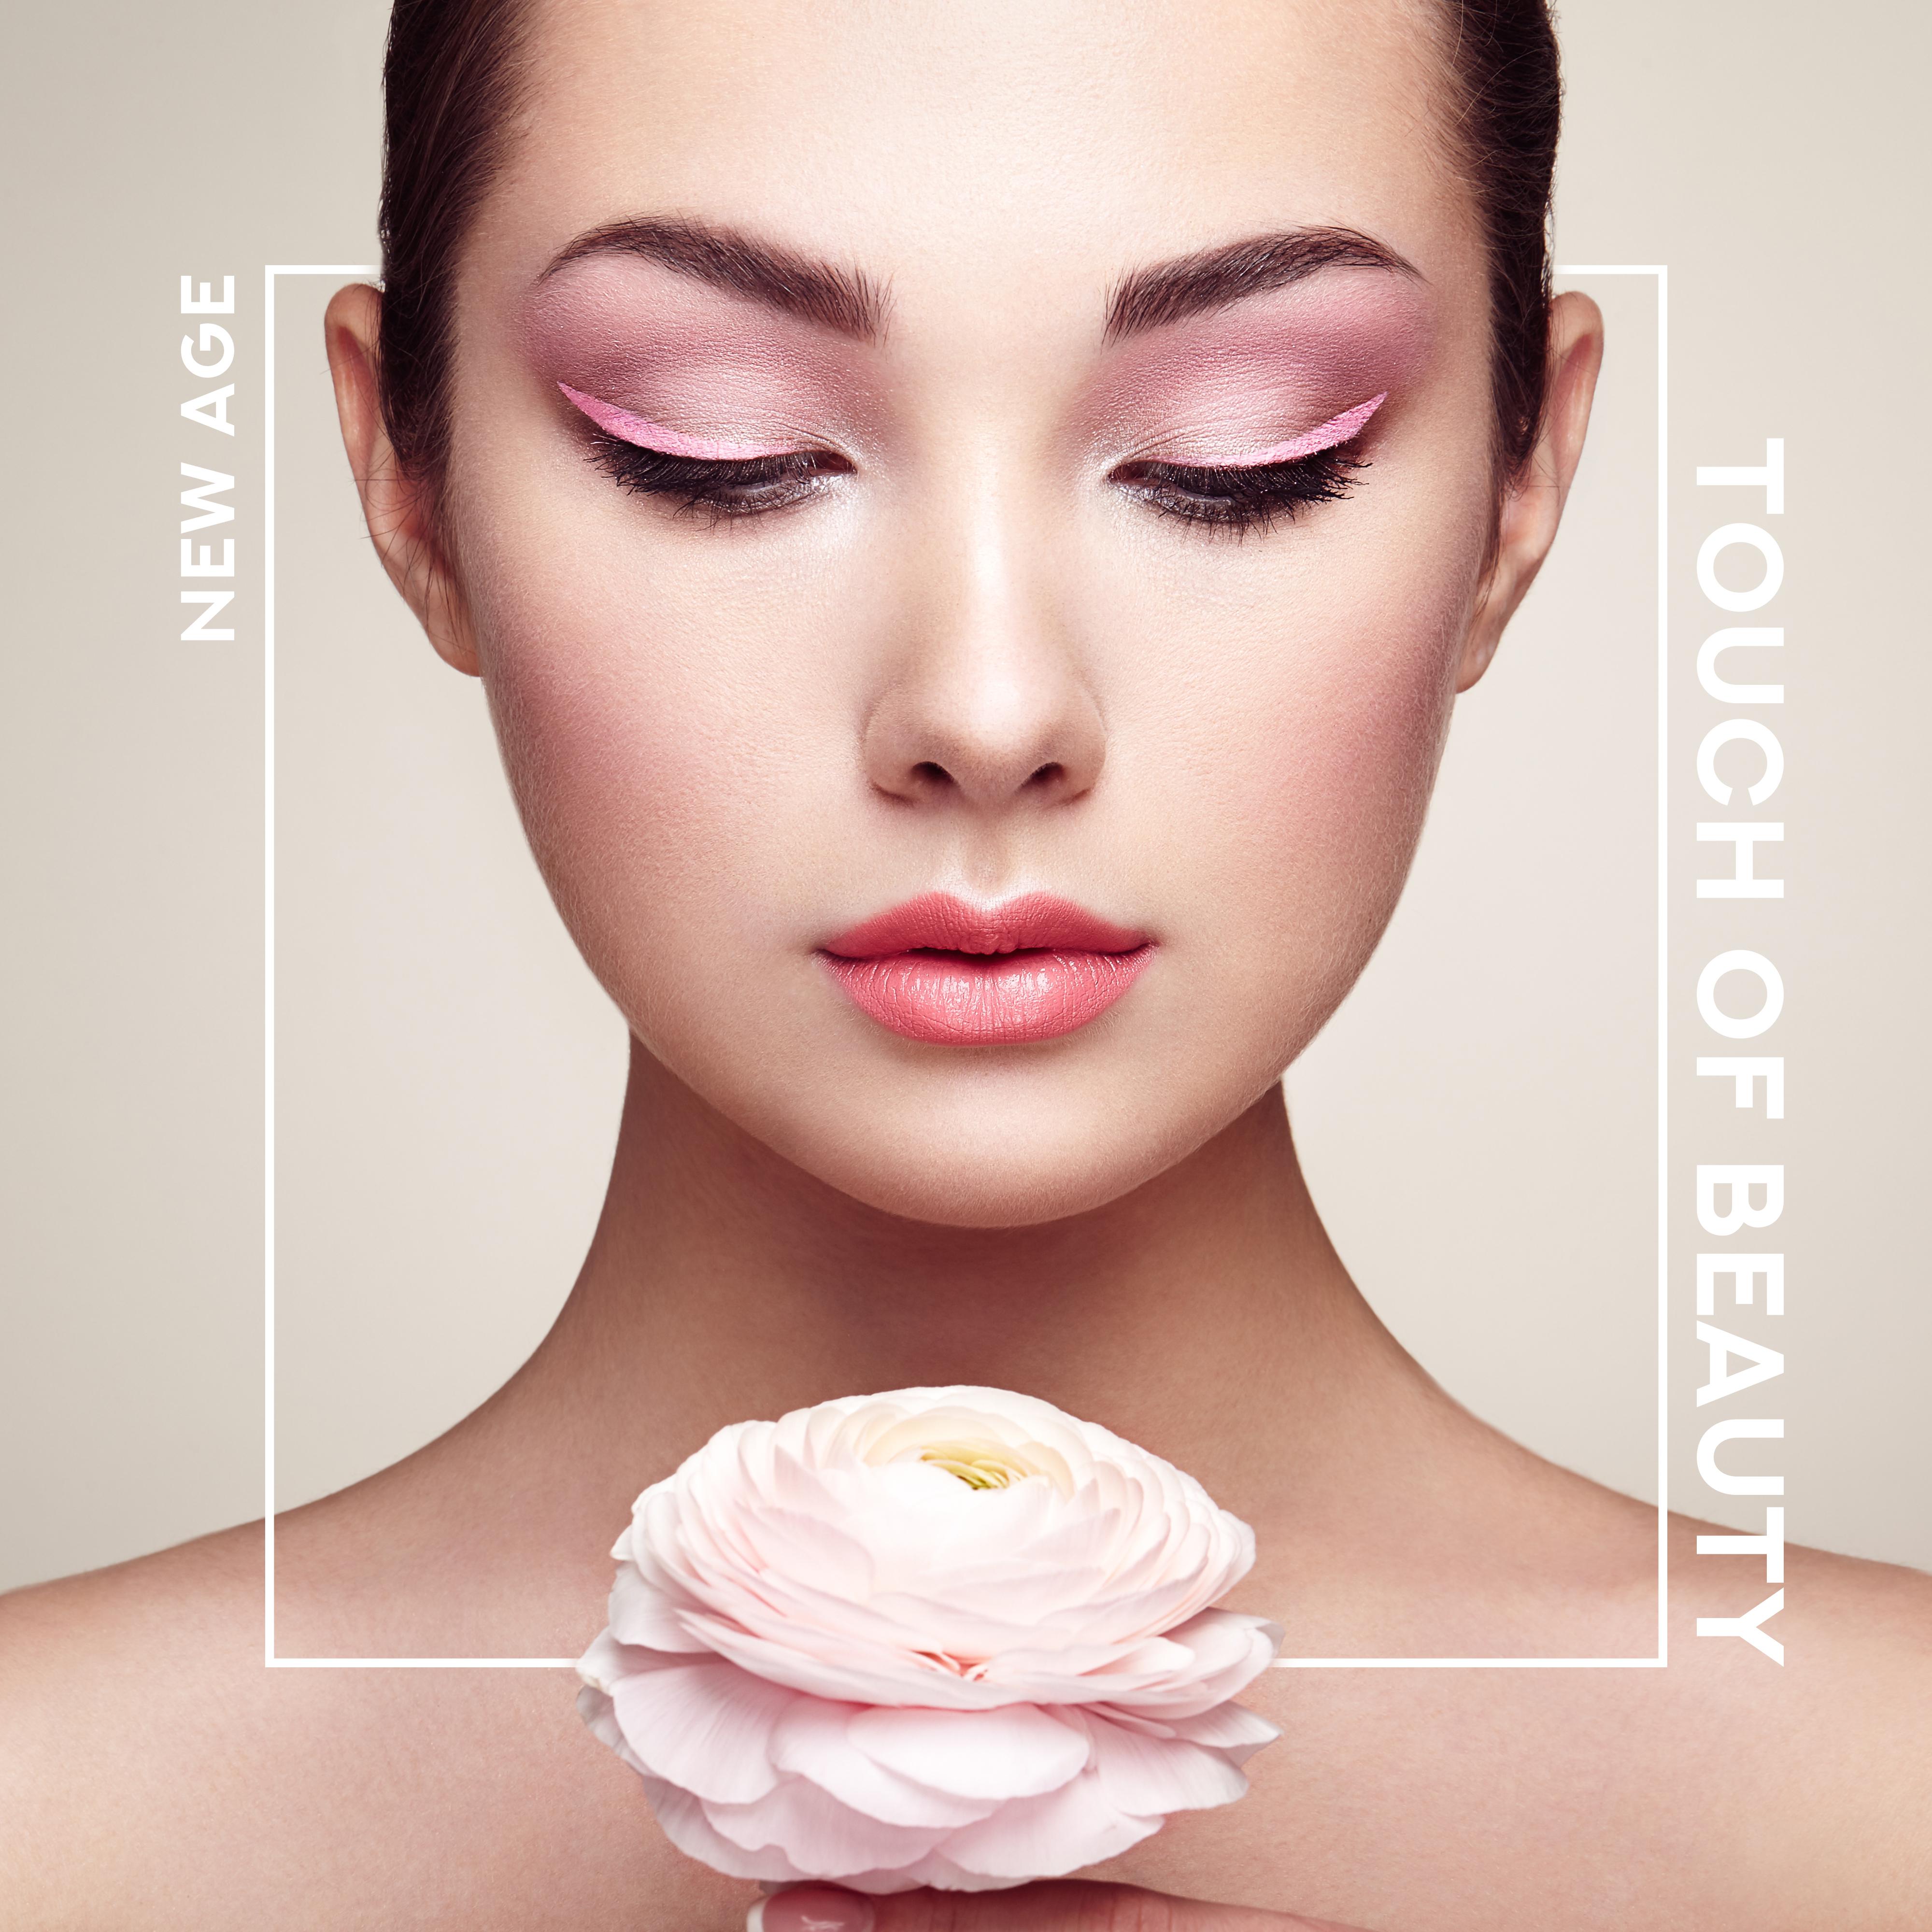 New Age Touch of Beauty: 15 Sensual Songs for Spa Salon, Wellness, Hot Baths & Relaxing Massage Session